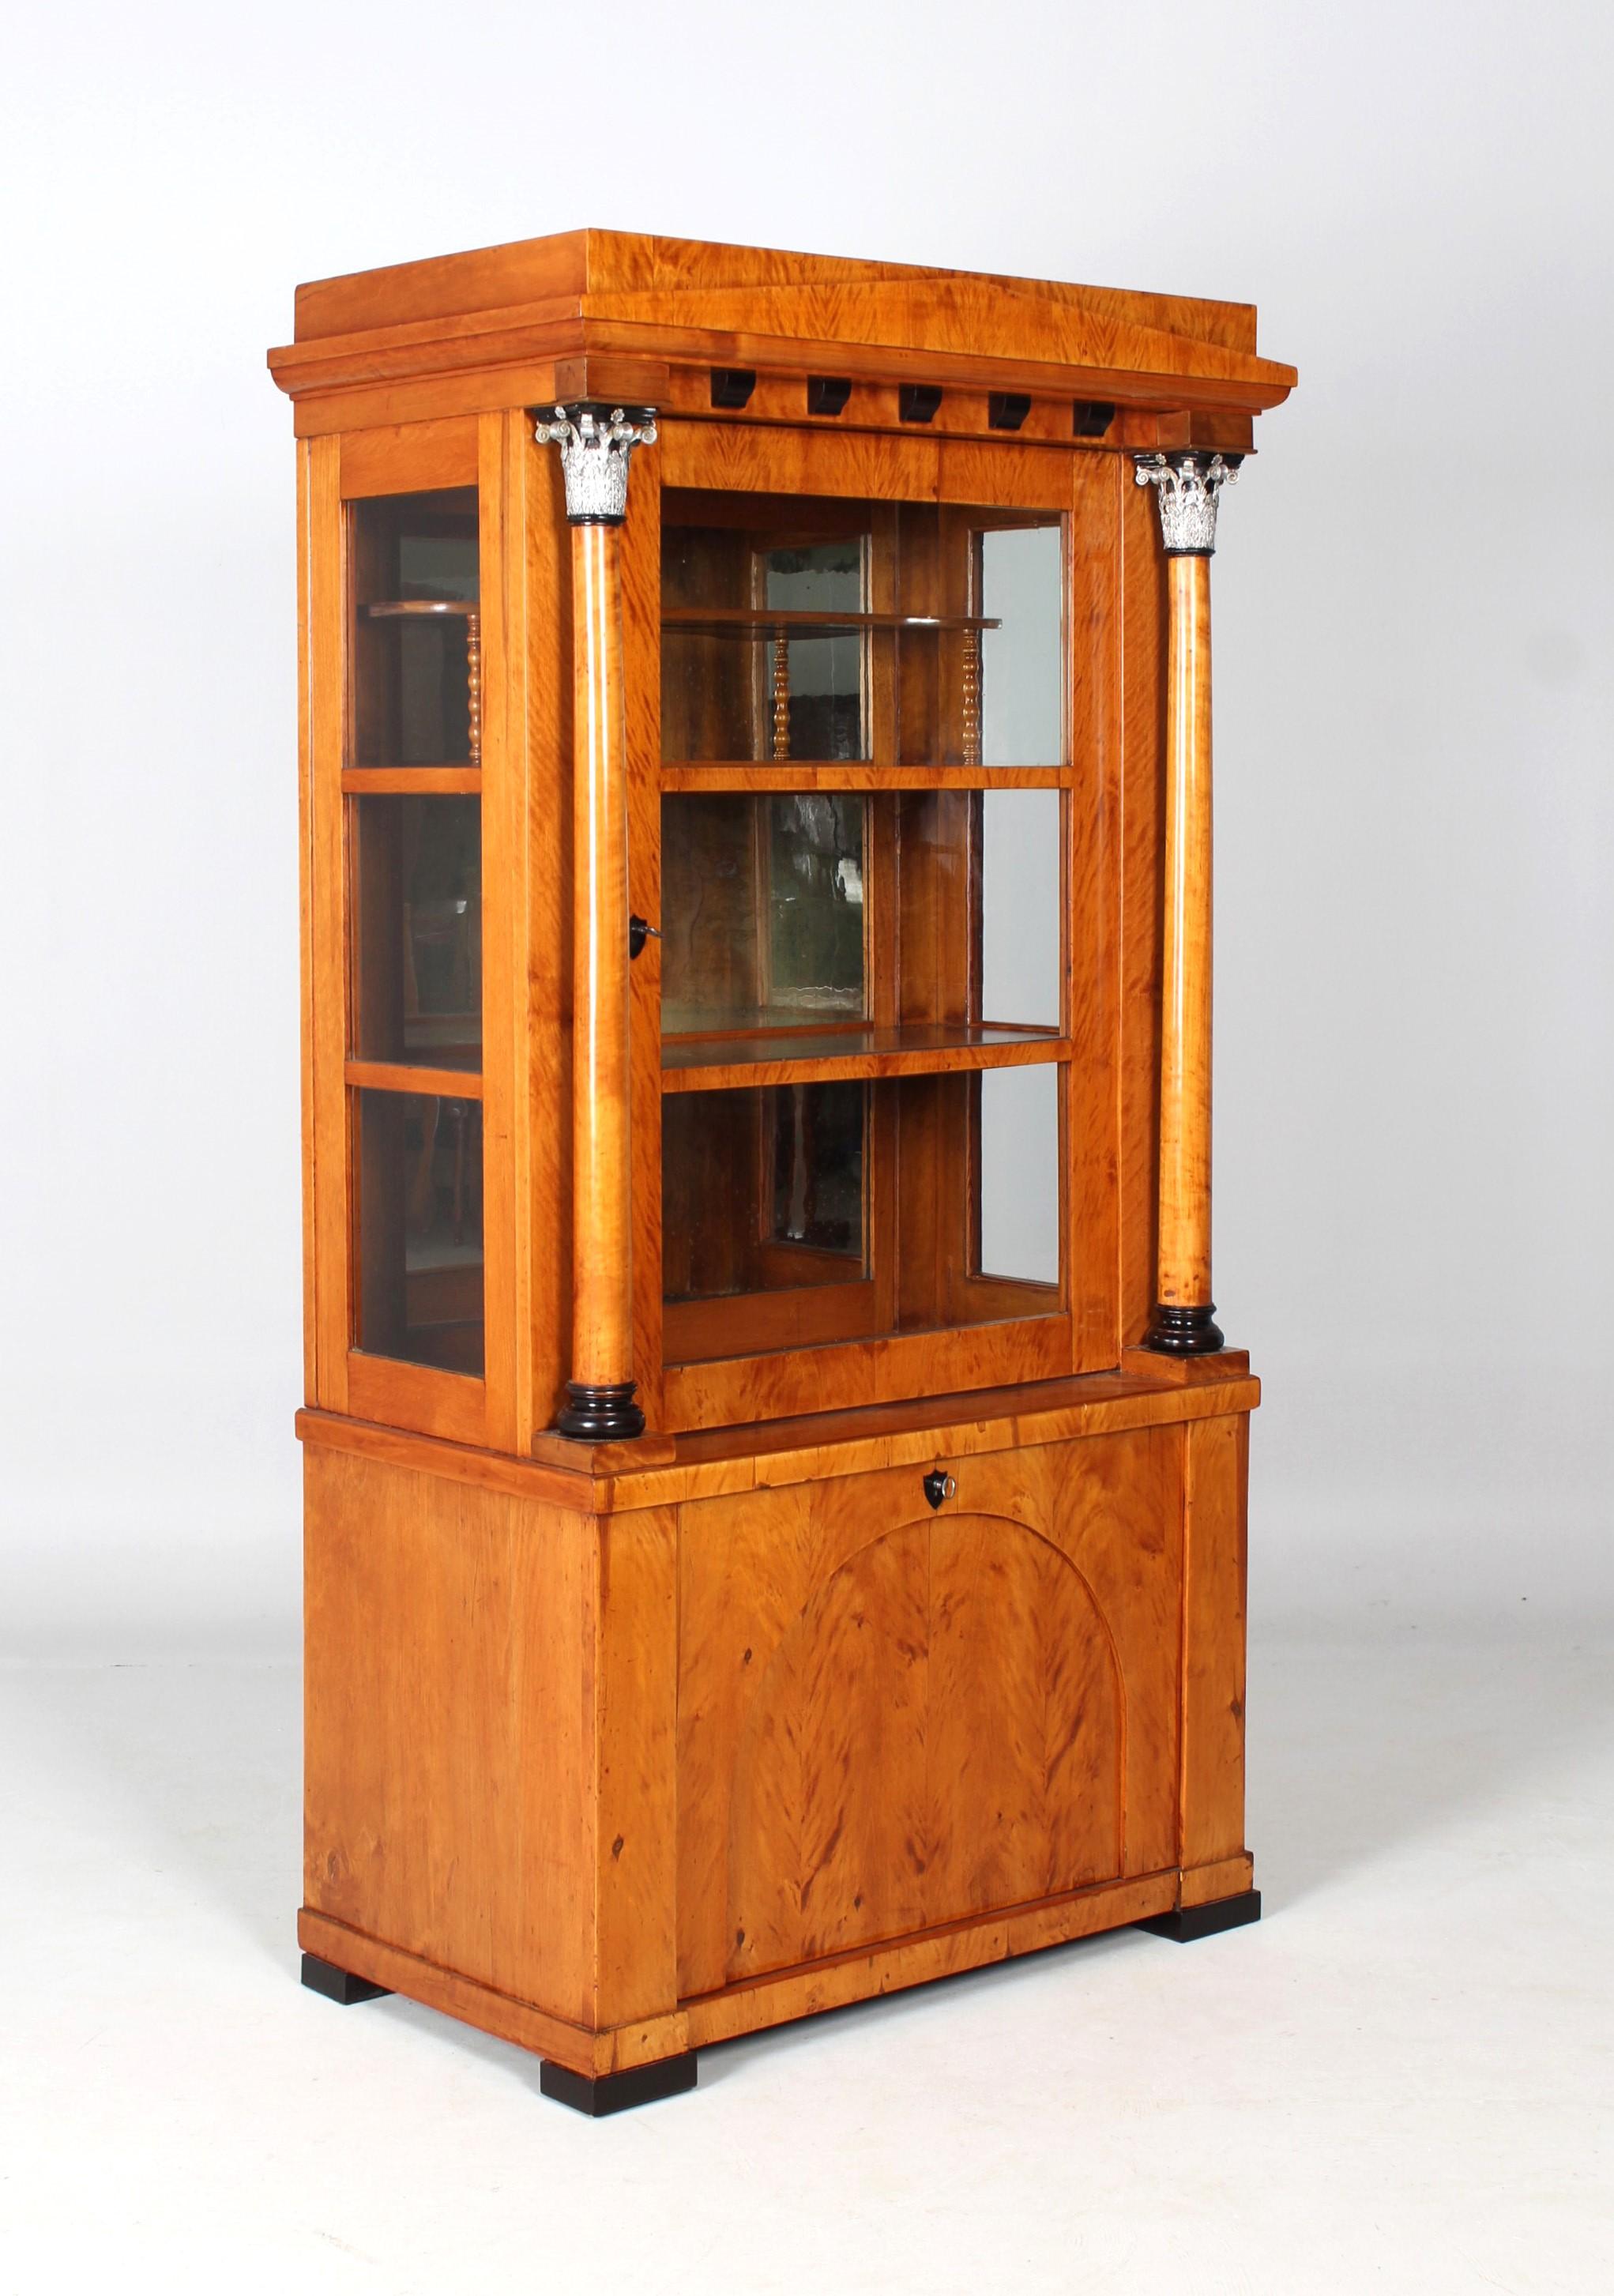 Early 19th Century Biedermeier Display Cabinet with Columns, Vitrine, Birch In Excellent Condition For Sale In Greven, DE